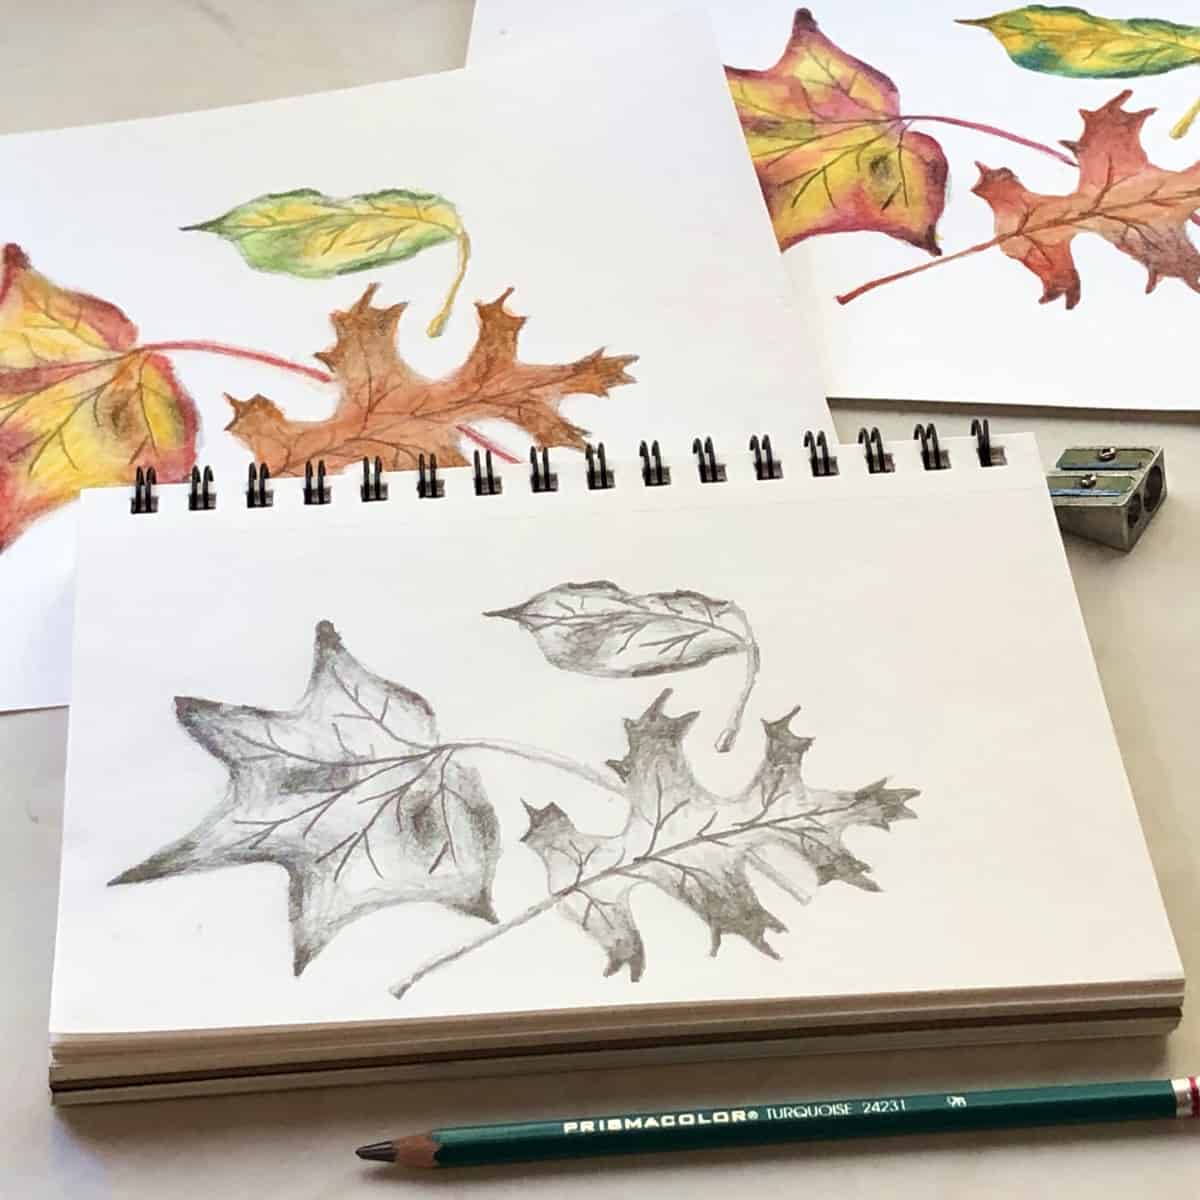 Pencil drawing of fall leaves on a sketch pad with colorful paintings of fall leaves.